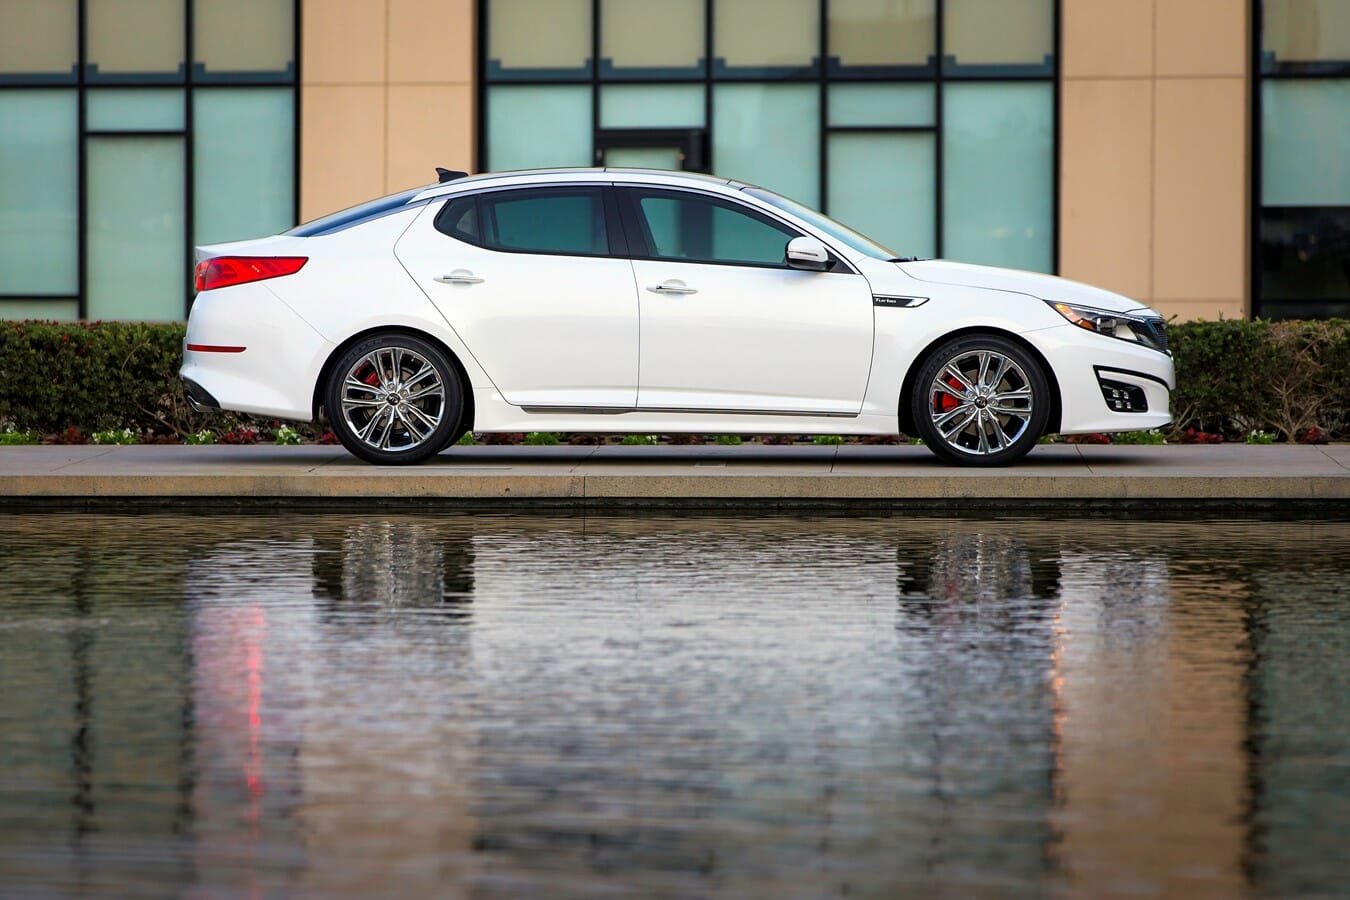 2015 Kia Optima Review: An Efficient and Safe Sedan That Feels Dated to Drive